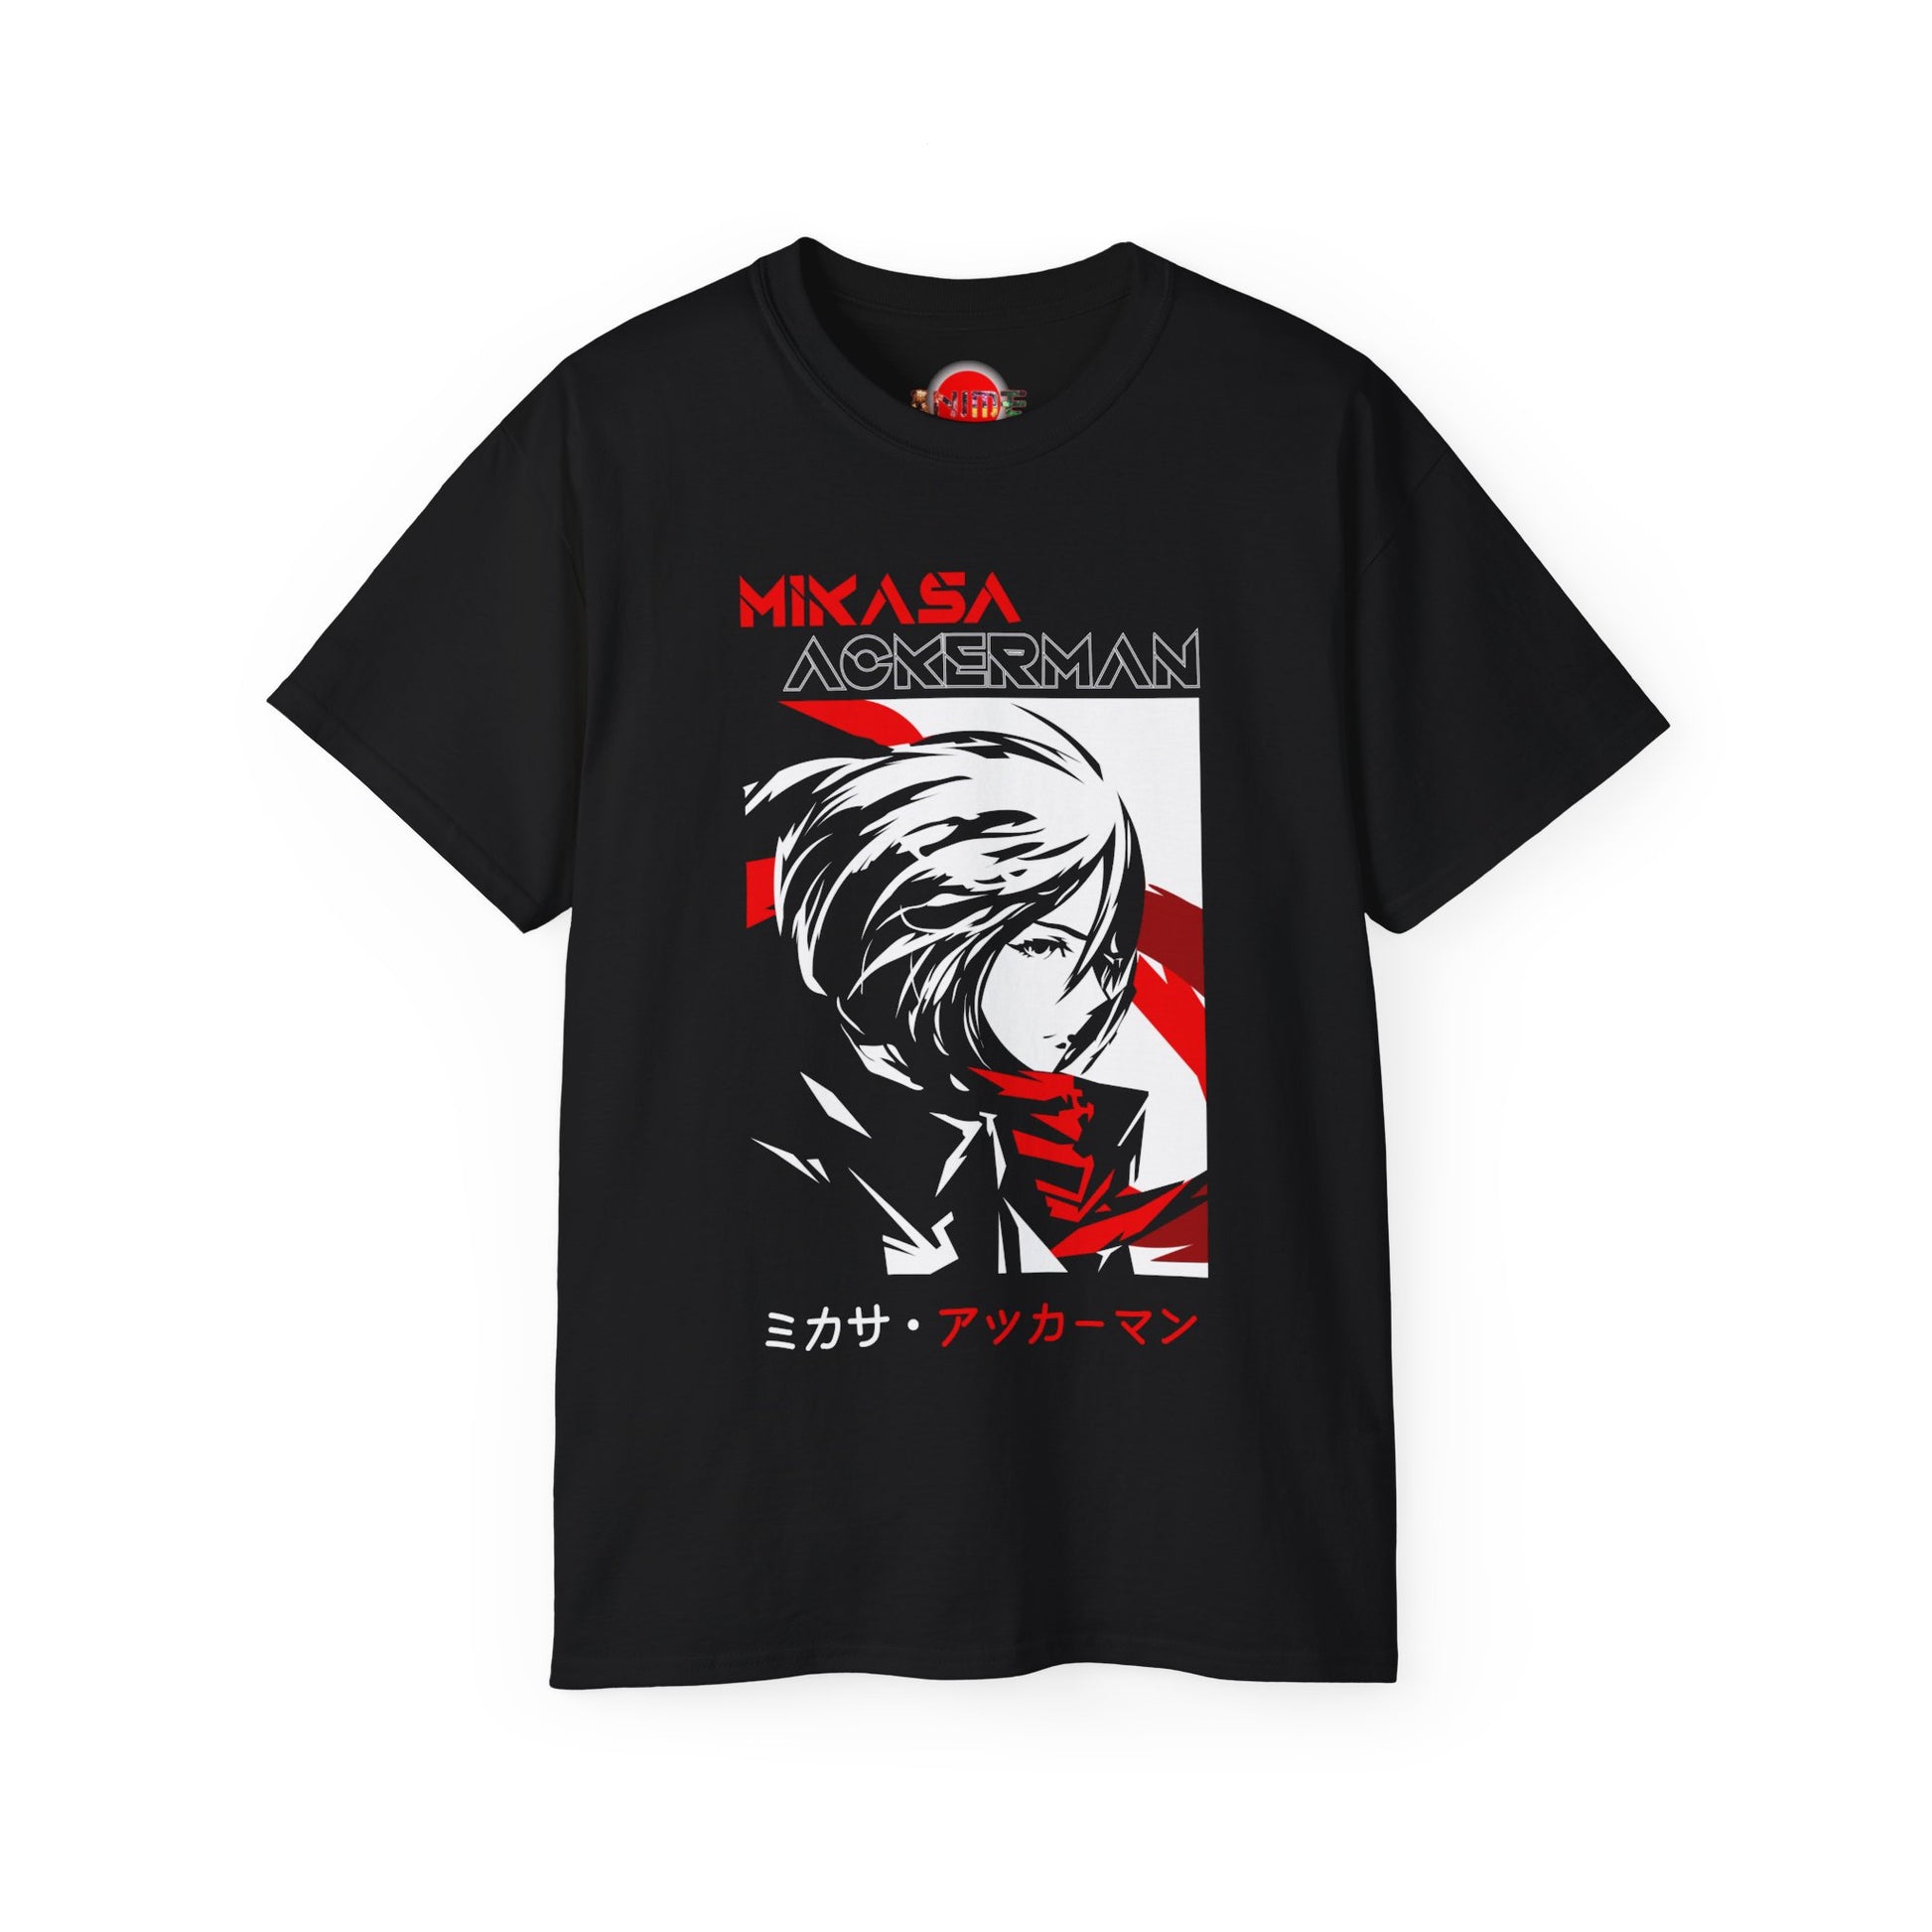 Black Graphic Tees | Attack on Titans Shirt | Japanese Anime World